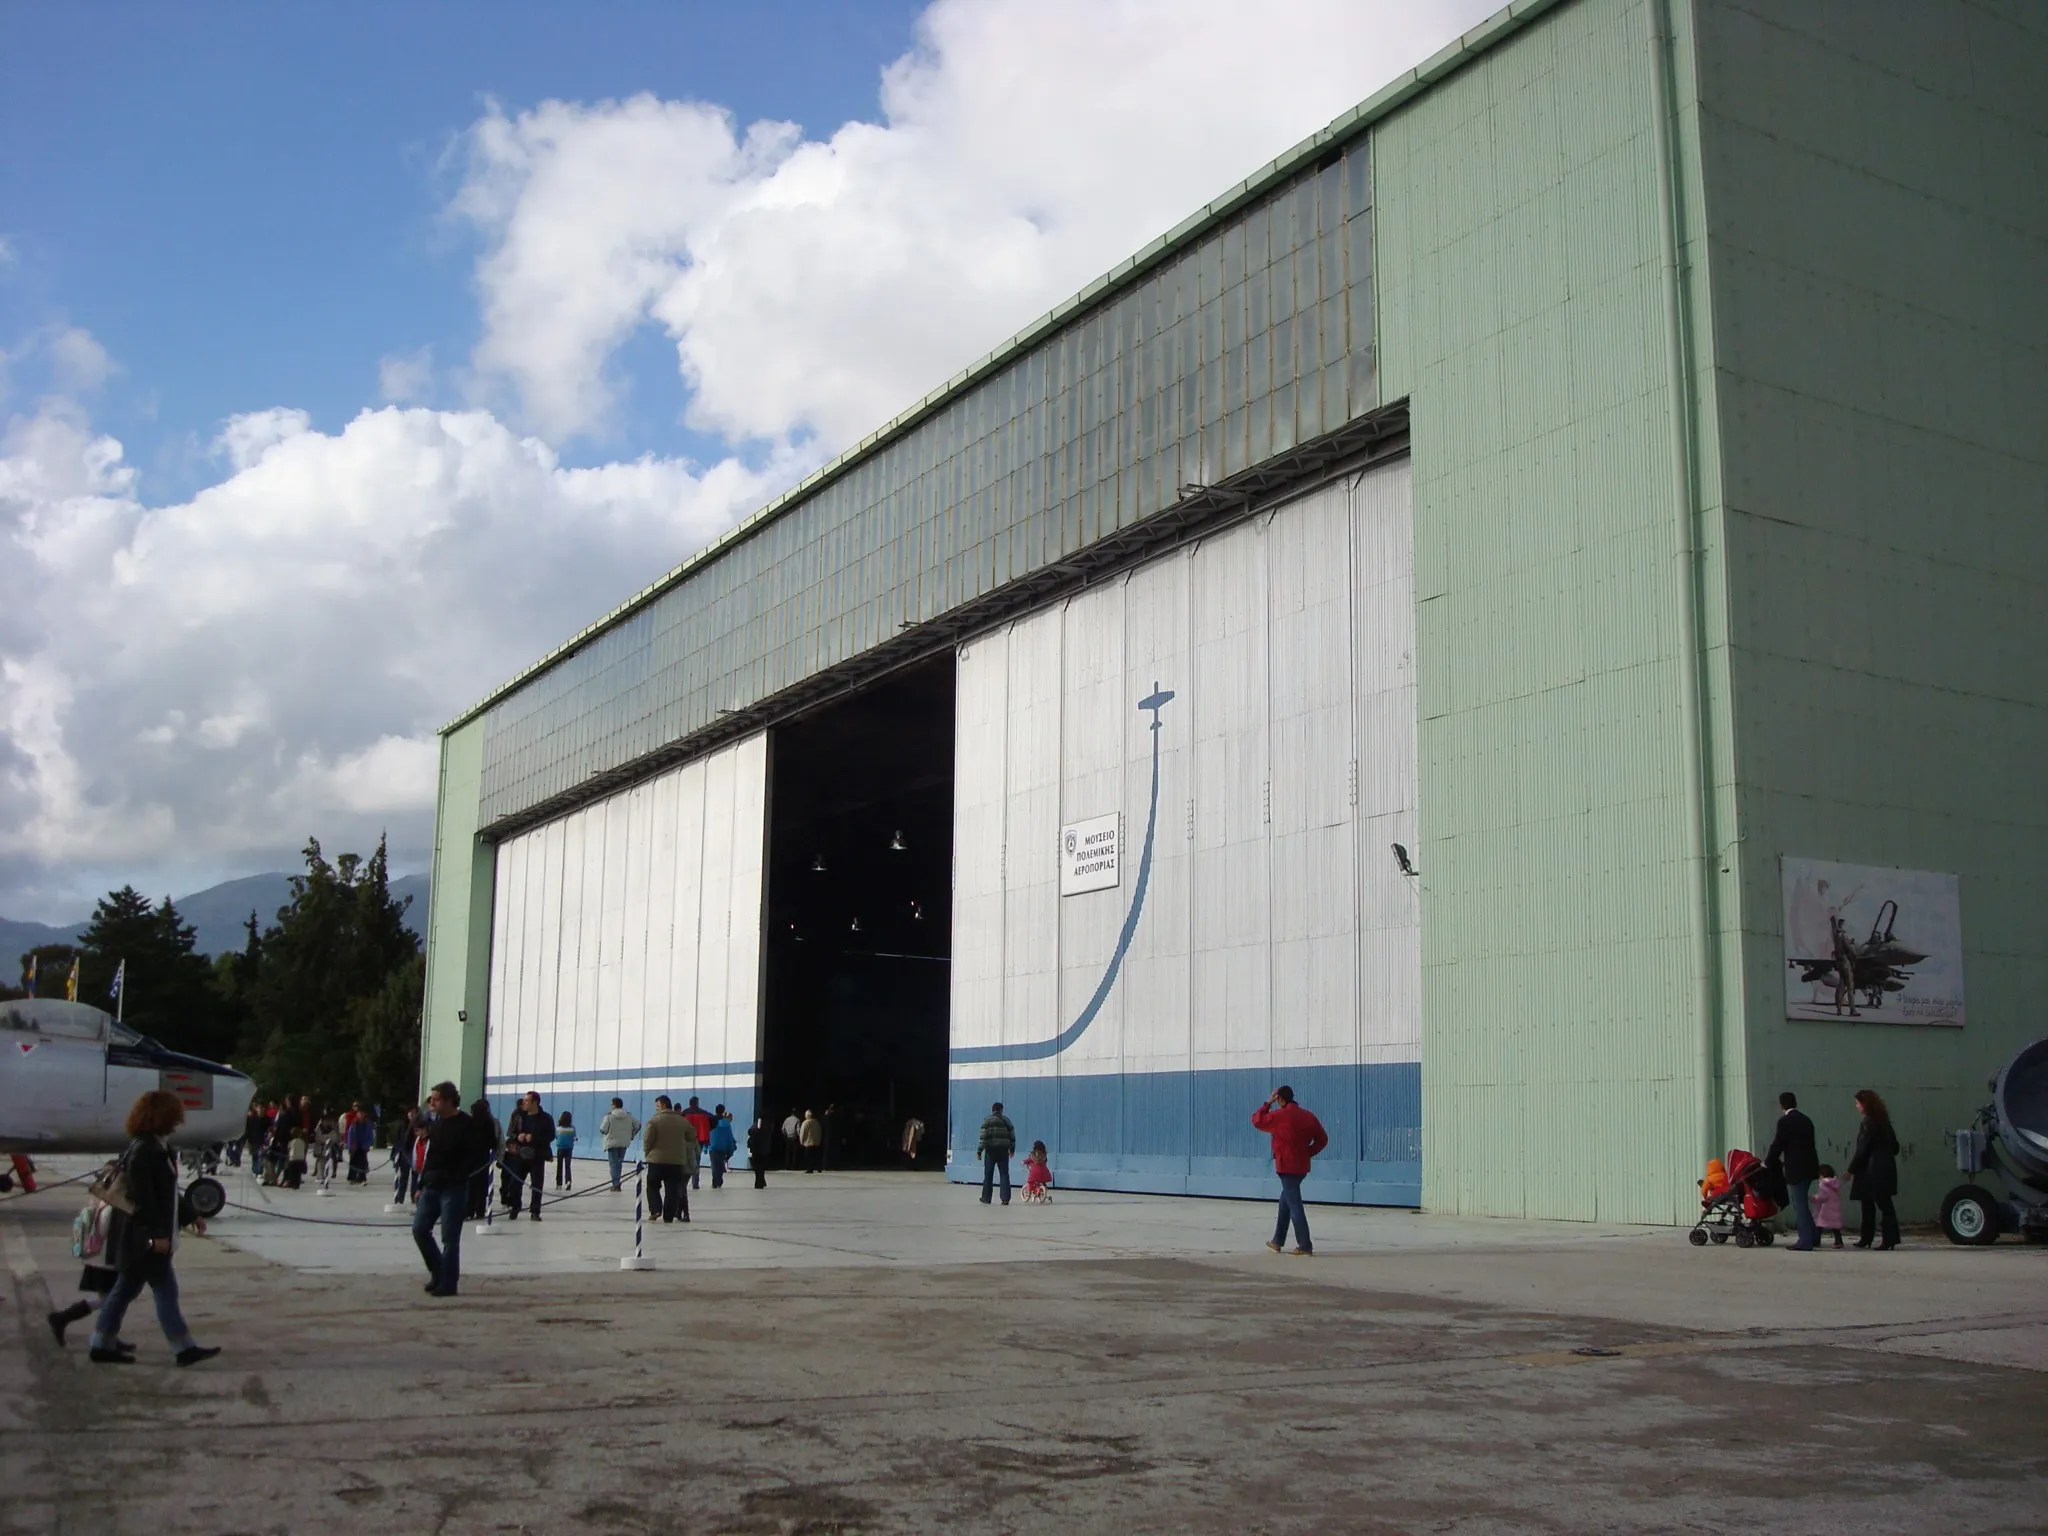 Photo showing: The hangar that hosts the Hellenic Air Force Museum in Dekeleia AFB. The Hangar, named "Leros", was built by the Italians in the Aegean island of Leros before WW2 and was transfered at Dekeleia AFB to host the museum's collection.